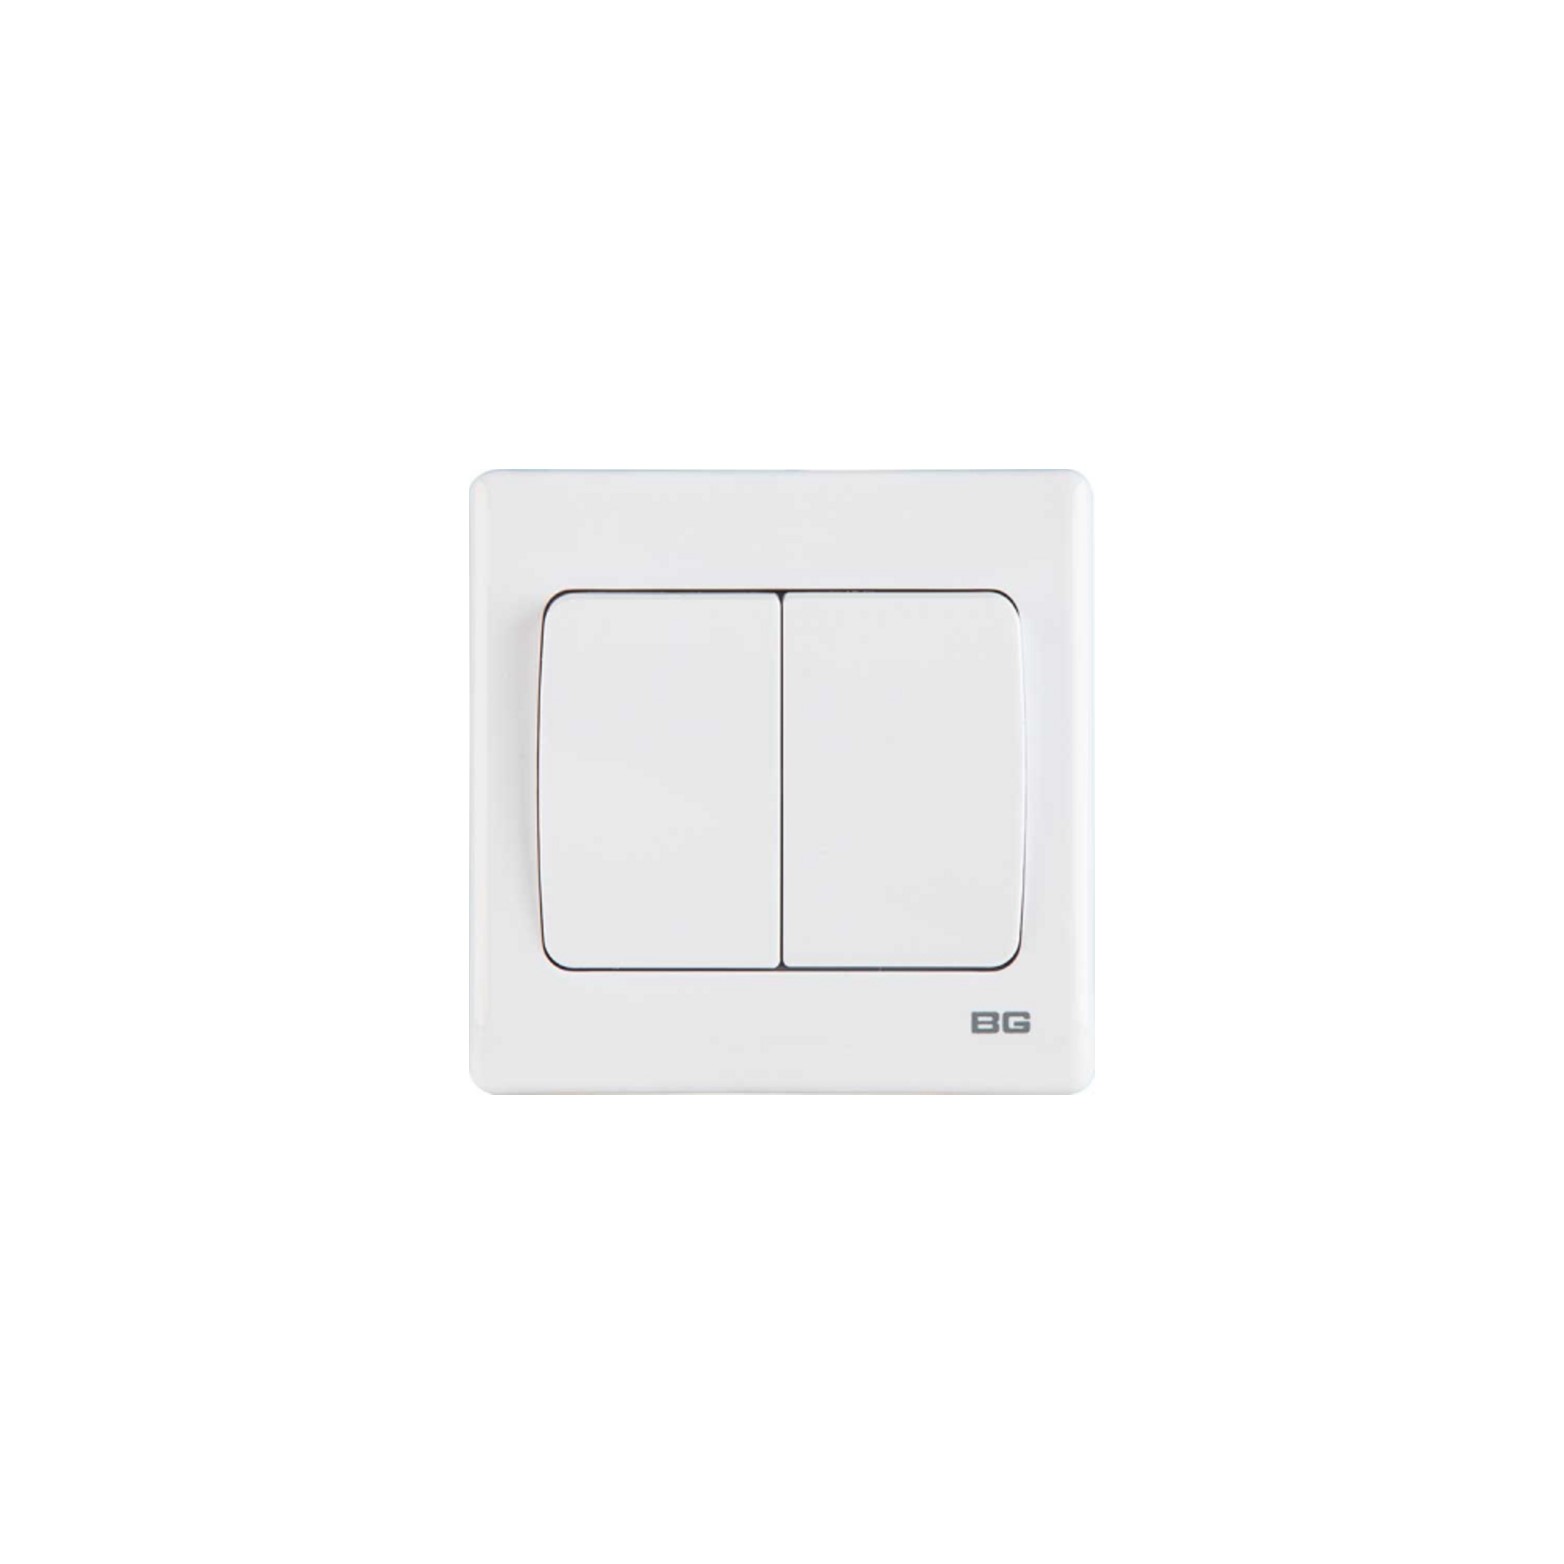 White SlimLine 2-Gang 2Way 10AX Switch, double screwless clip-on front plate curved corners(PCWH42W)